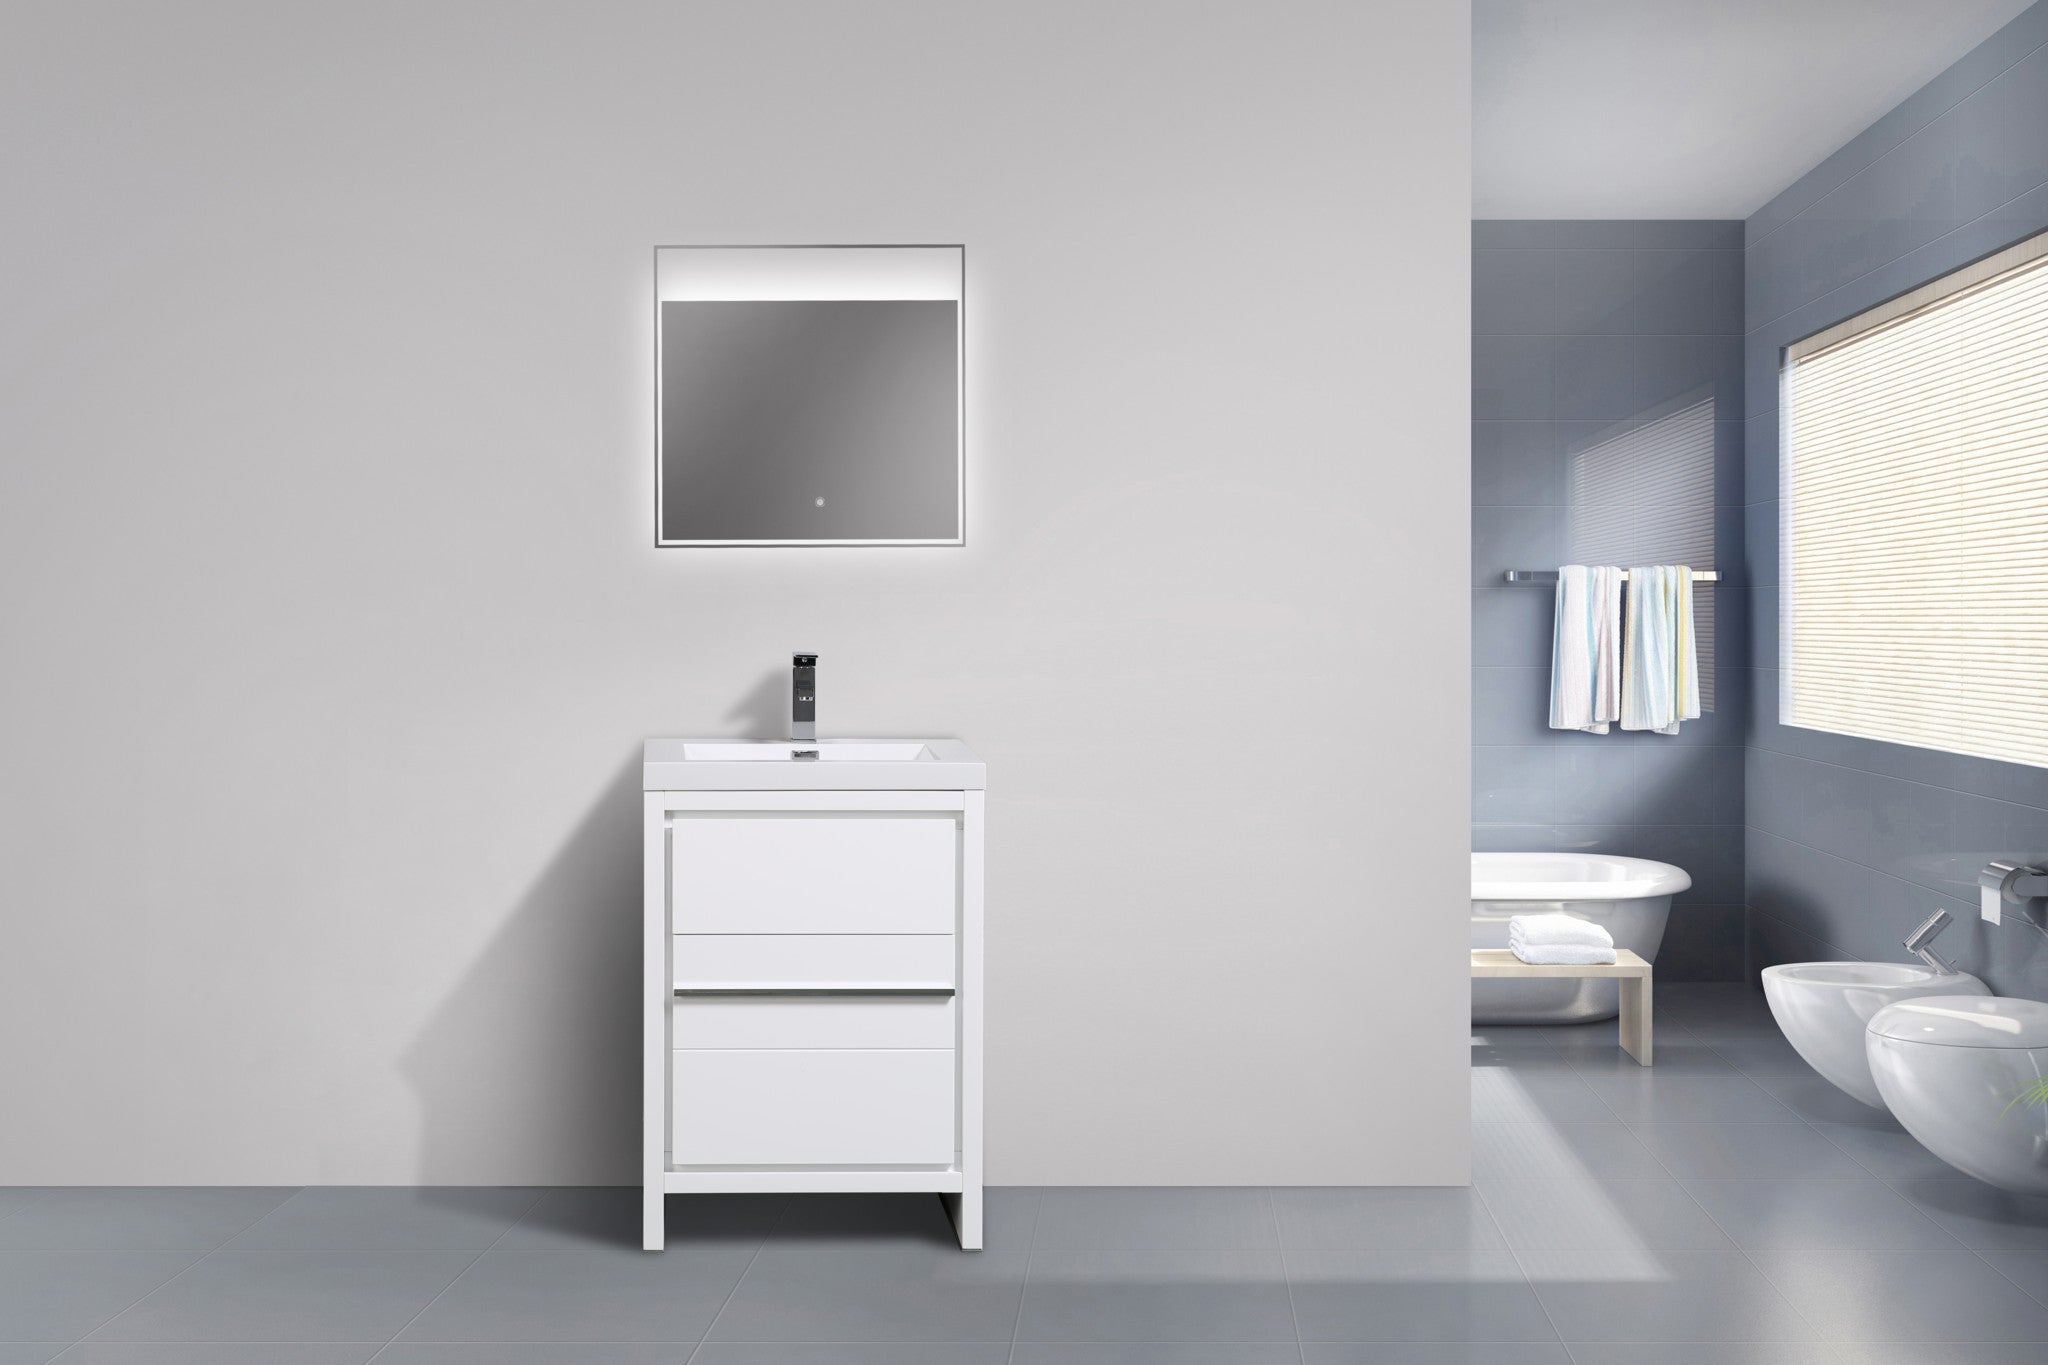 Granada 29.5 White High Gloss With Chrome Handle Cabinet, Square Cultured Marble Sink, Free Standing Modern Vanity Set